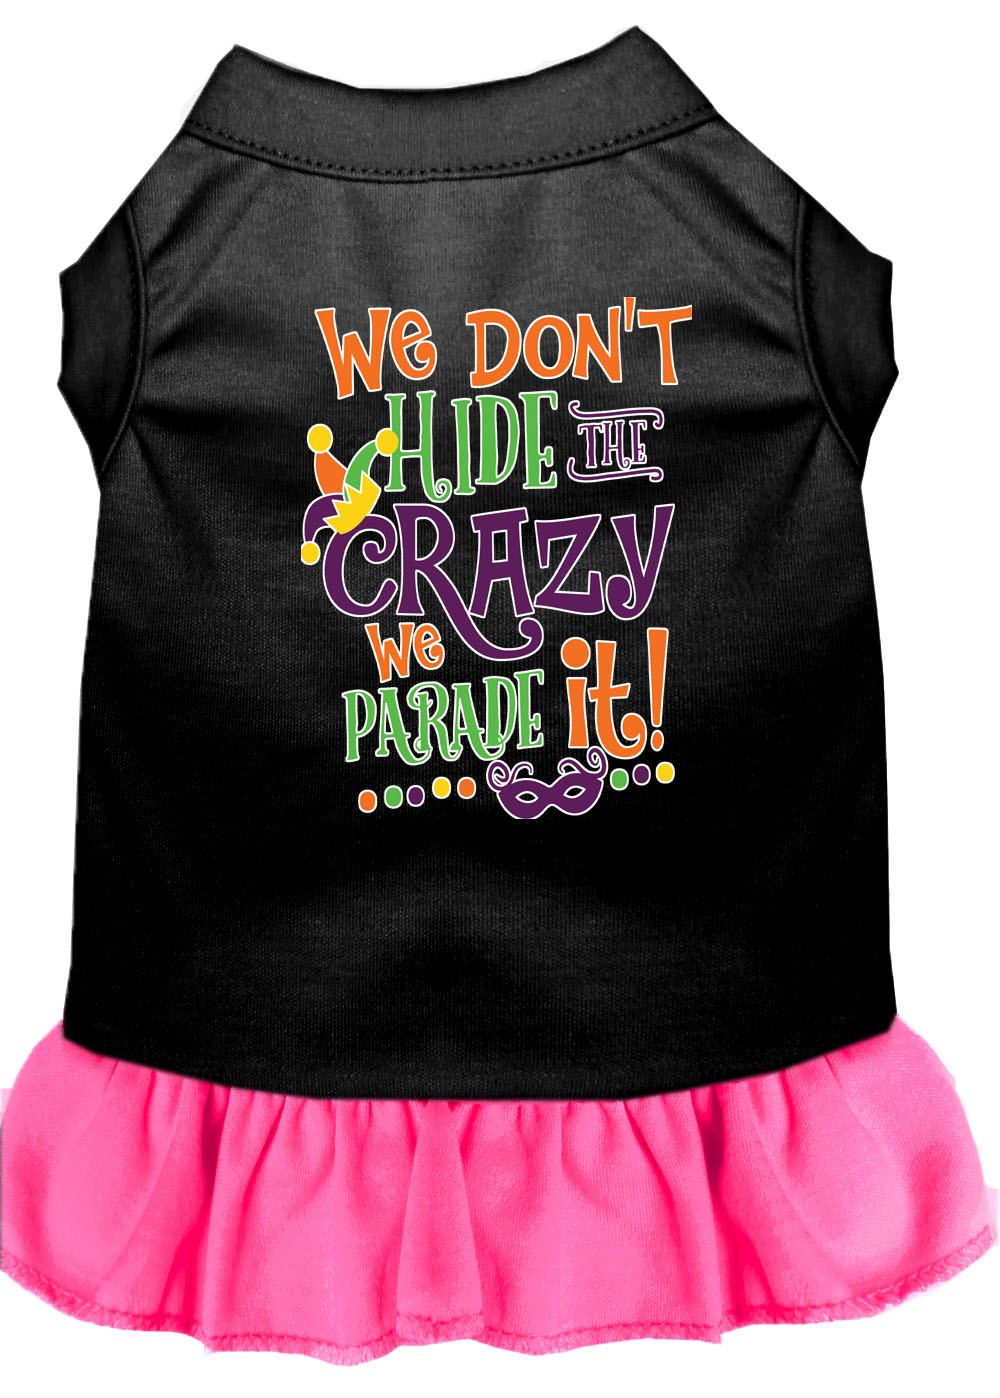 We Don't Hide the Crazy Screen Print Mardi Gras Dog Dress Black with Bright Pink XXL